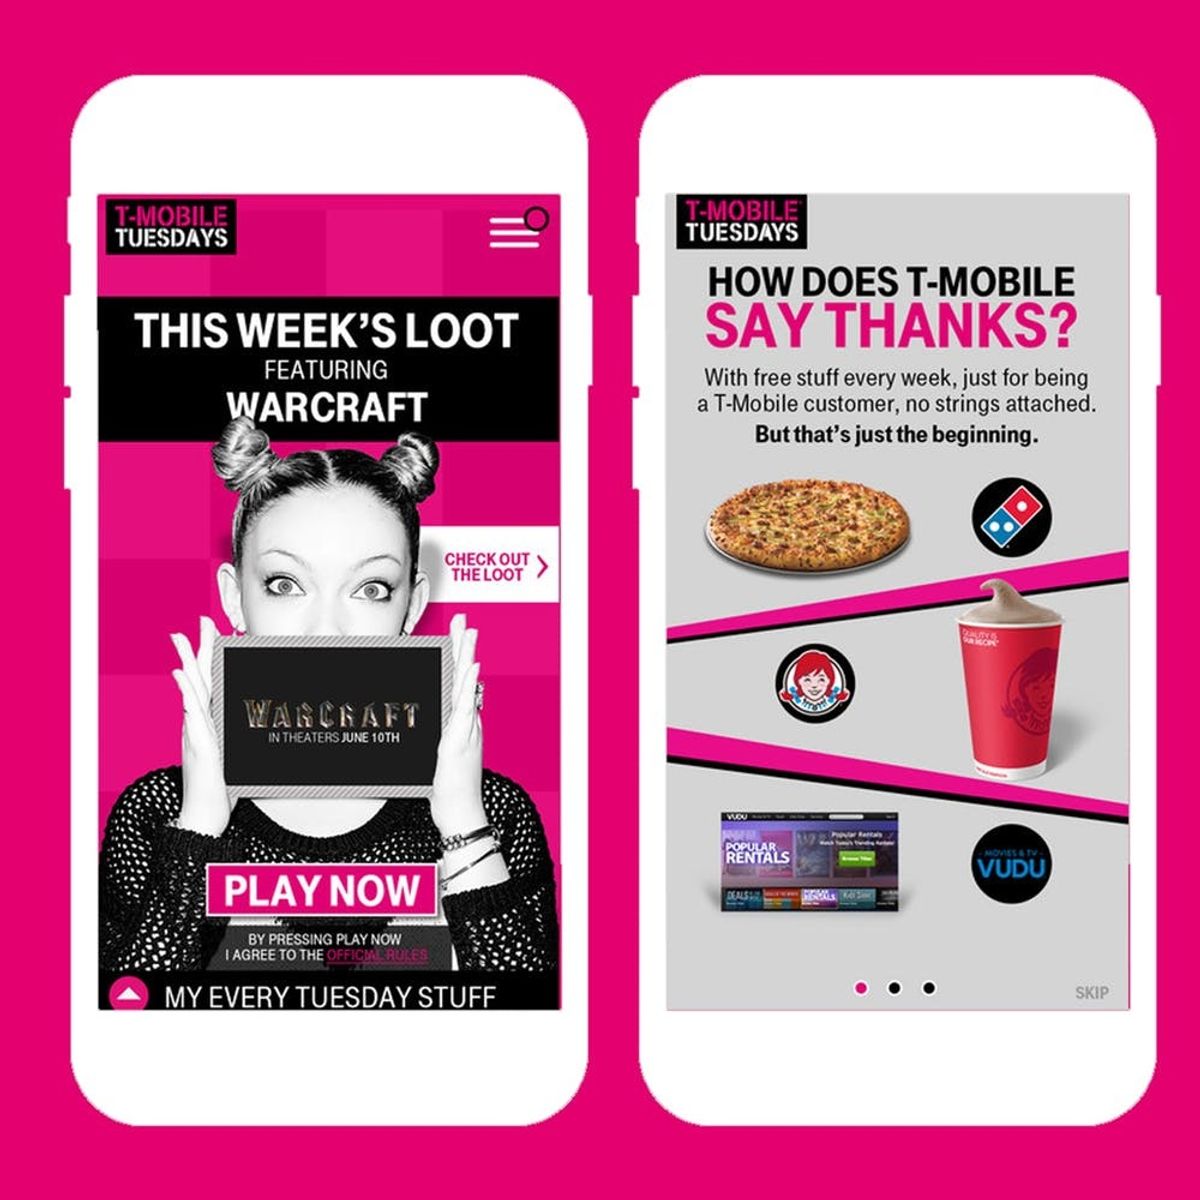 T-Mobile Is Giving Away Free Stuff to Subscribers Every Tuesday (Including Pizza)